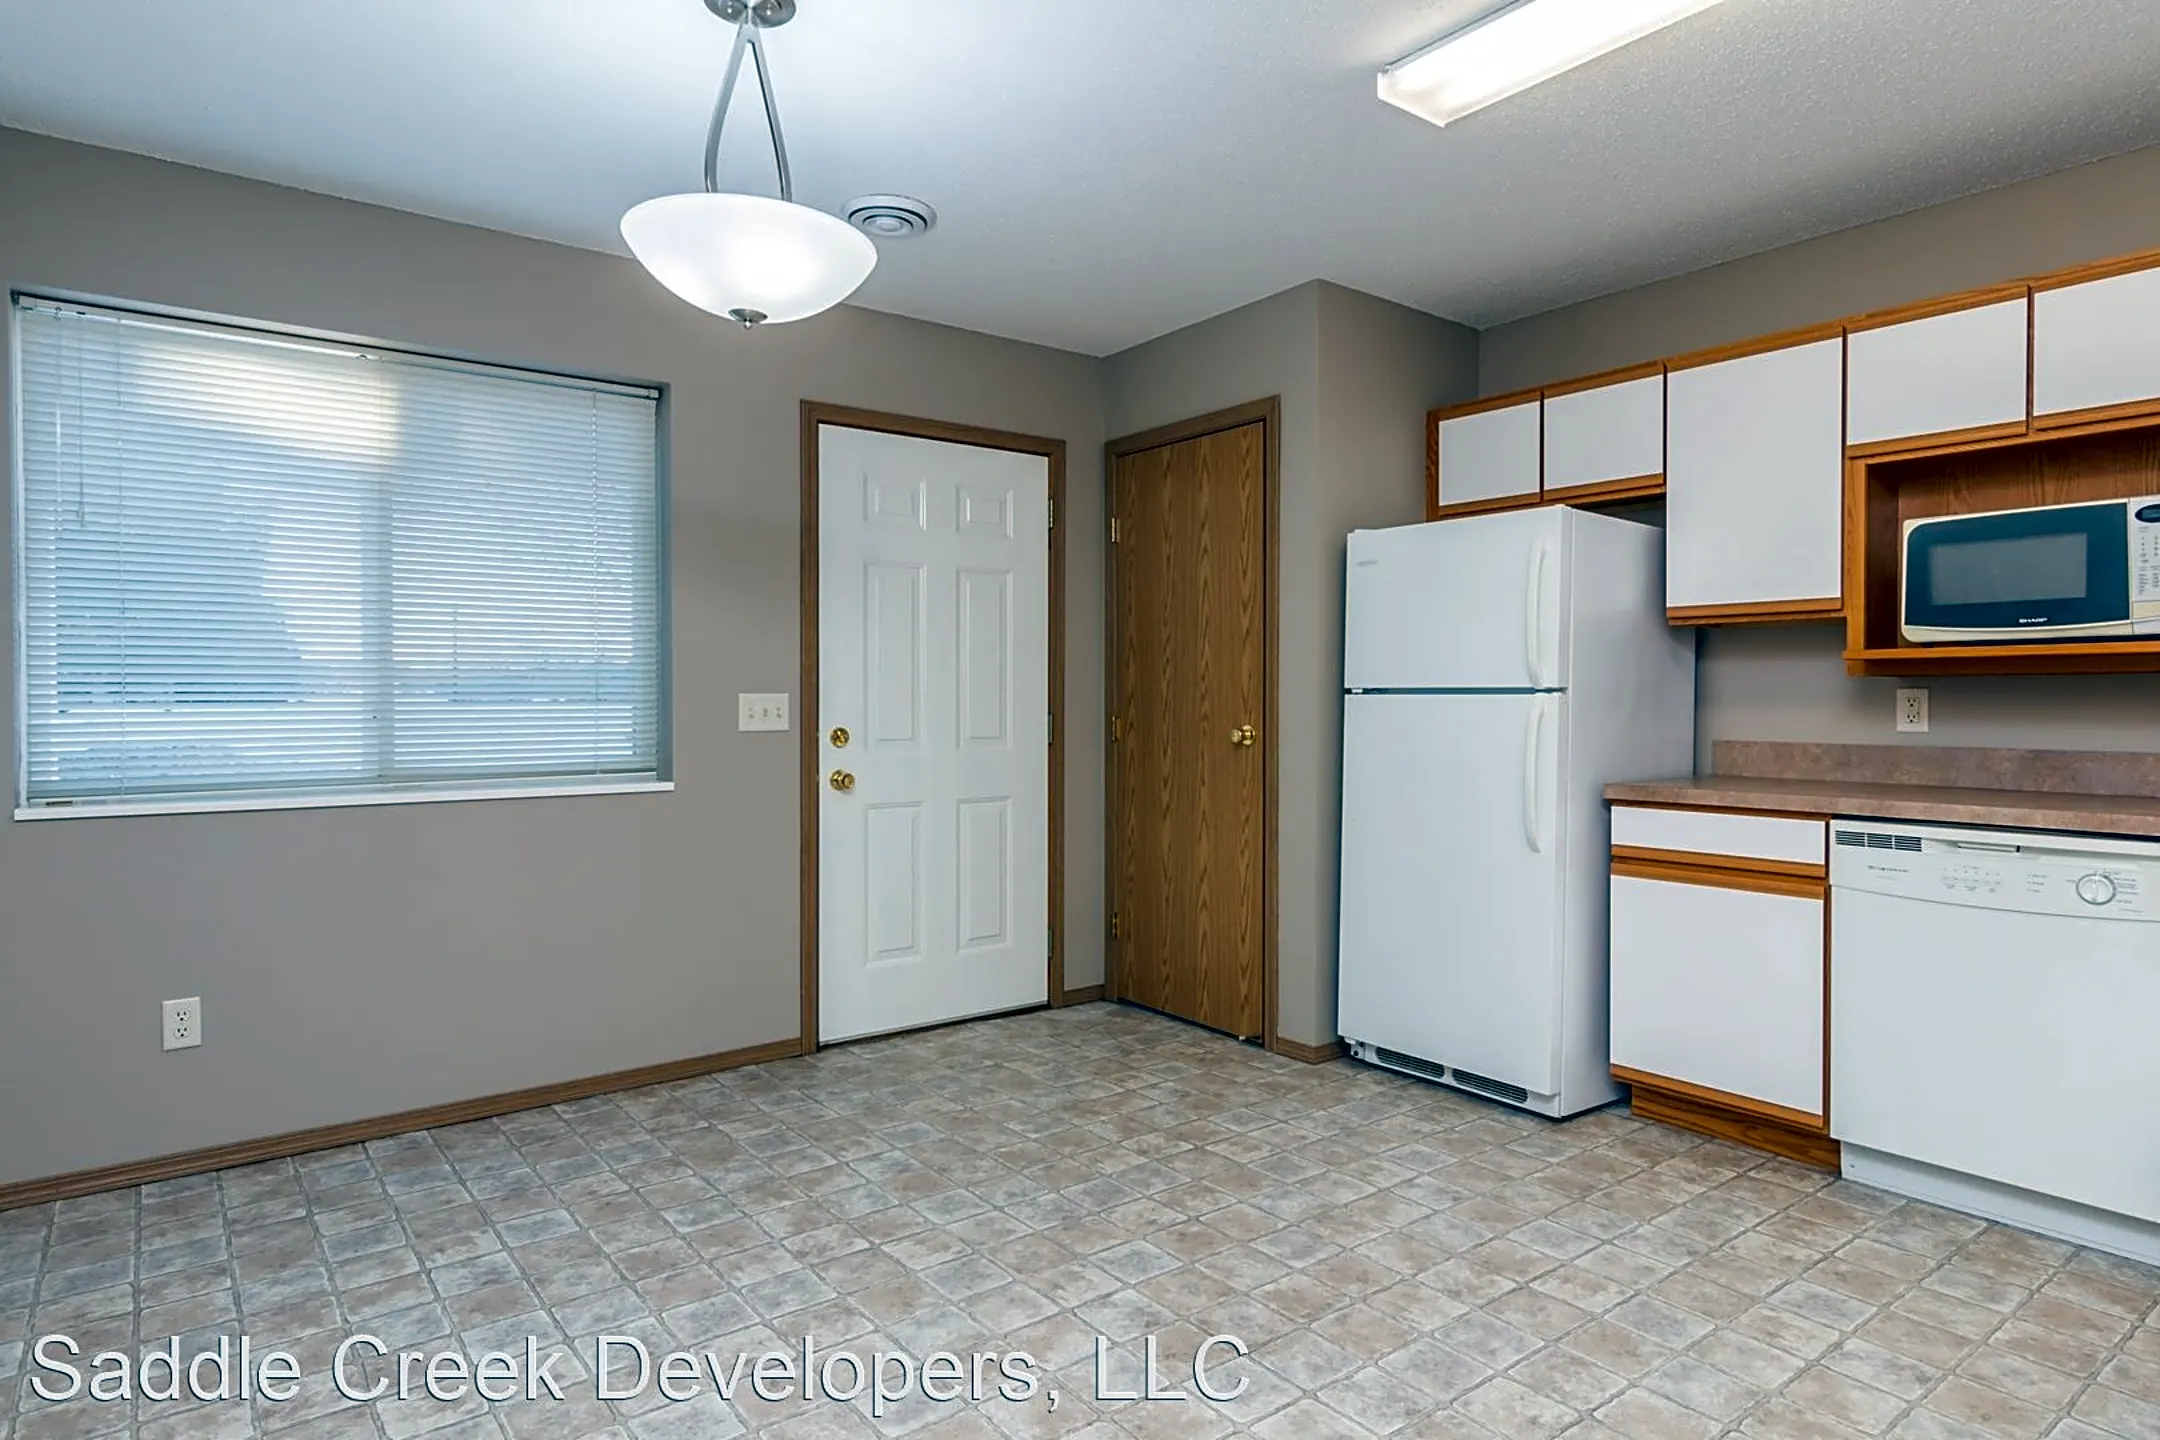 Bedroom - Saddle Creek Townhomes - Sioux Falls, SD